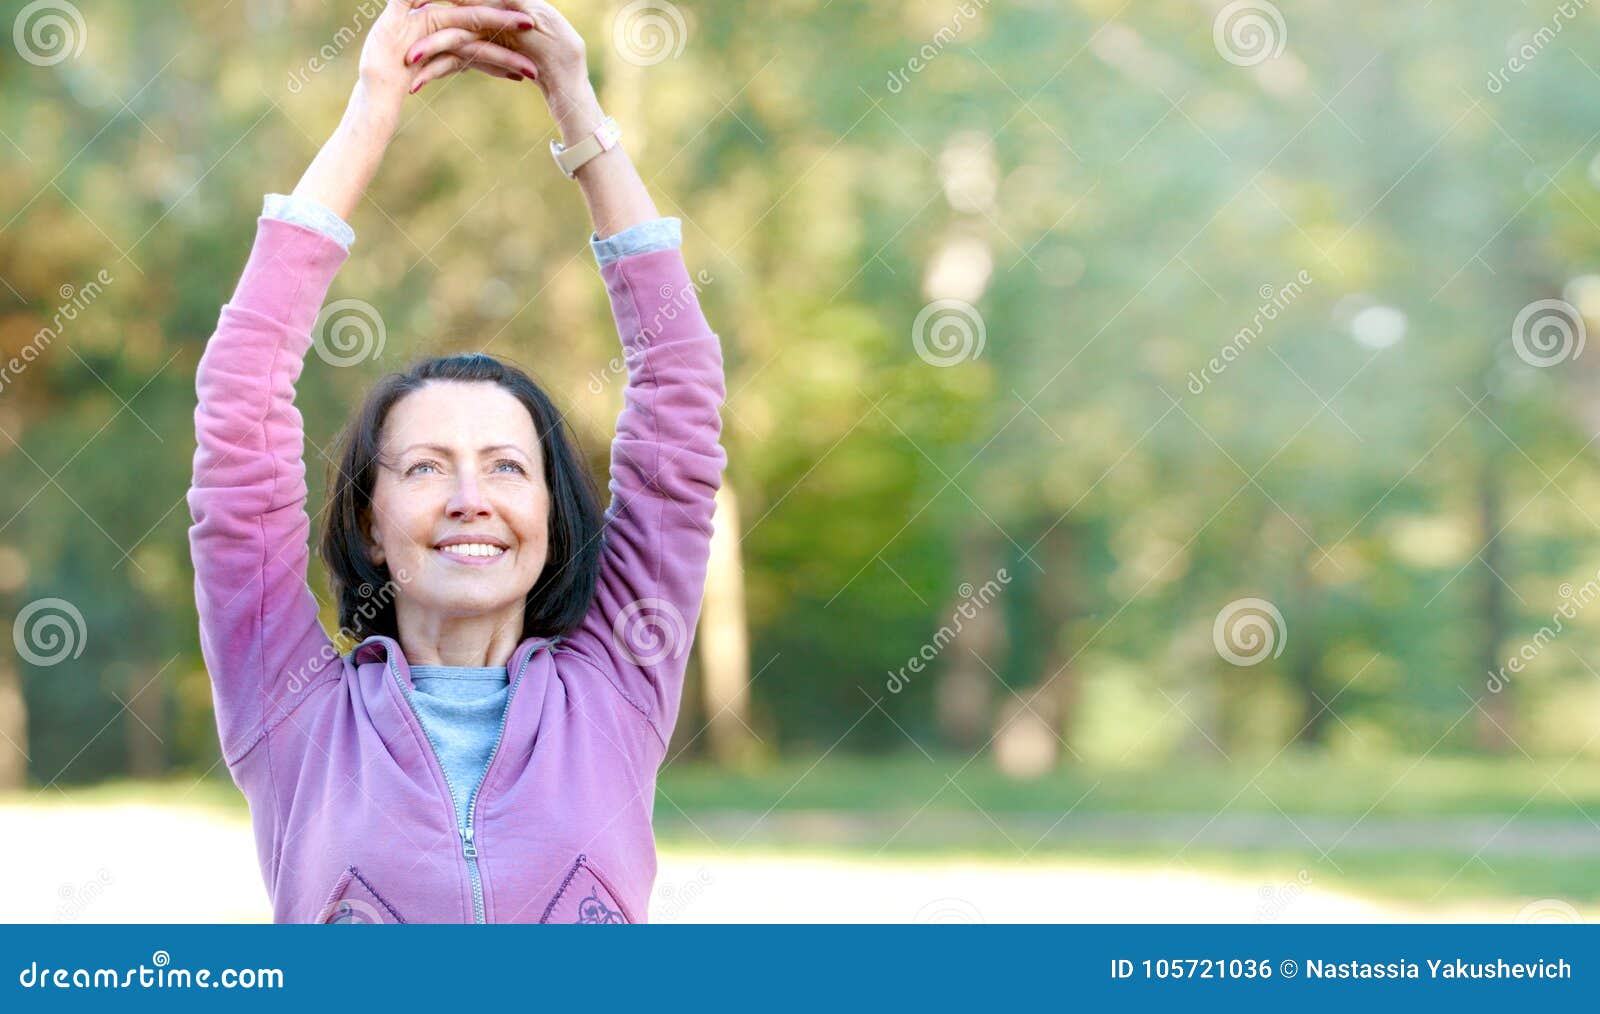 portrait of mature woman before or after jog in the park